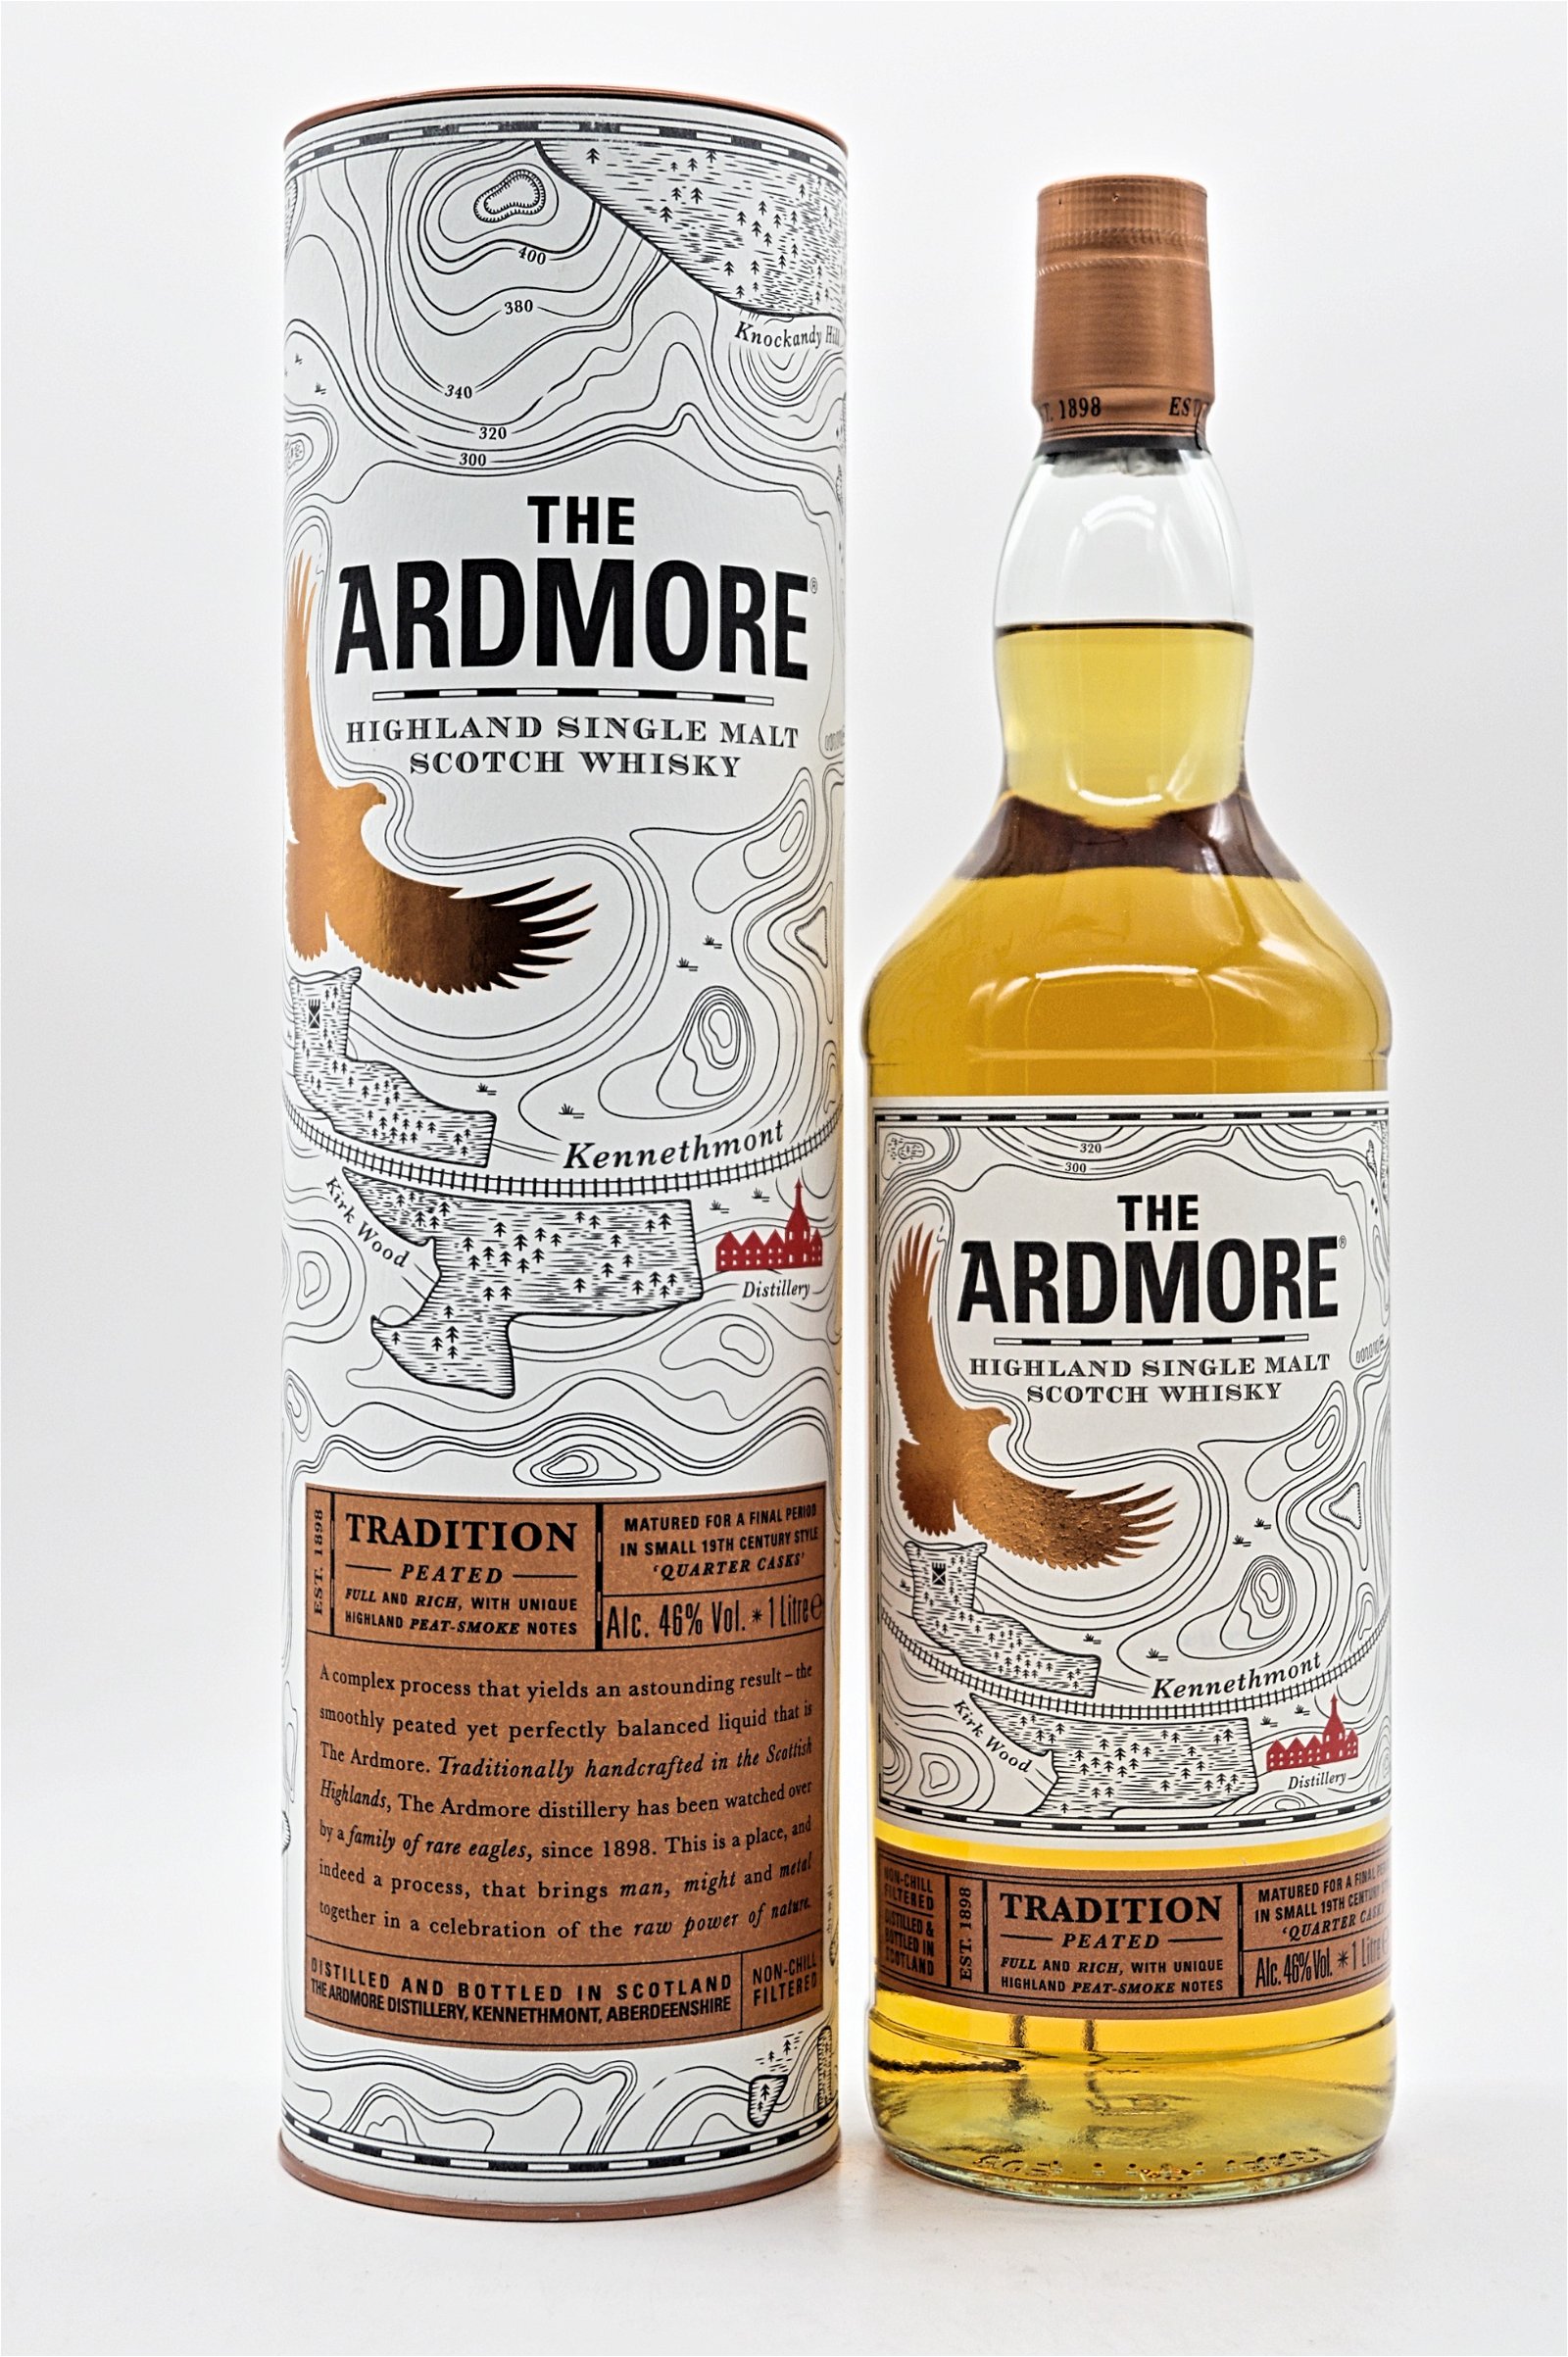 The Ardmore Traditional Peated Highland Single Malt Scotch Whisky